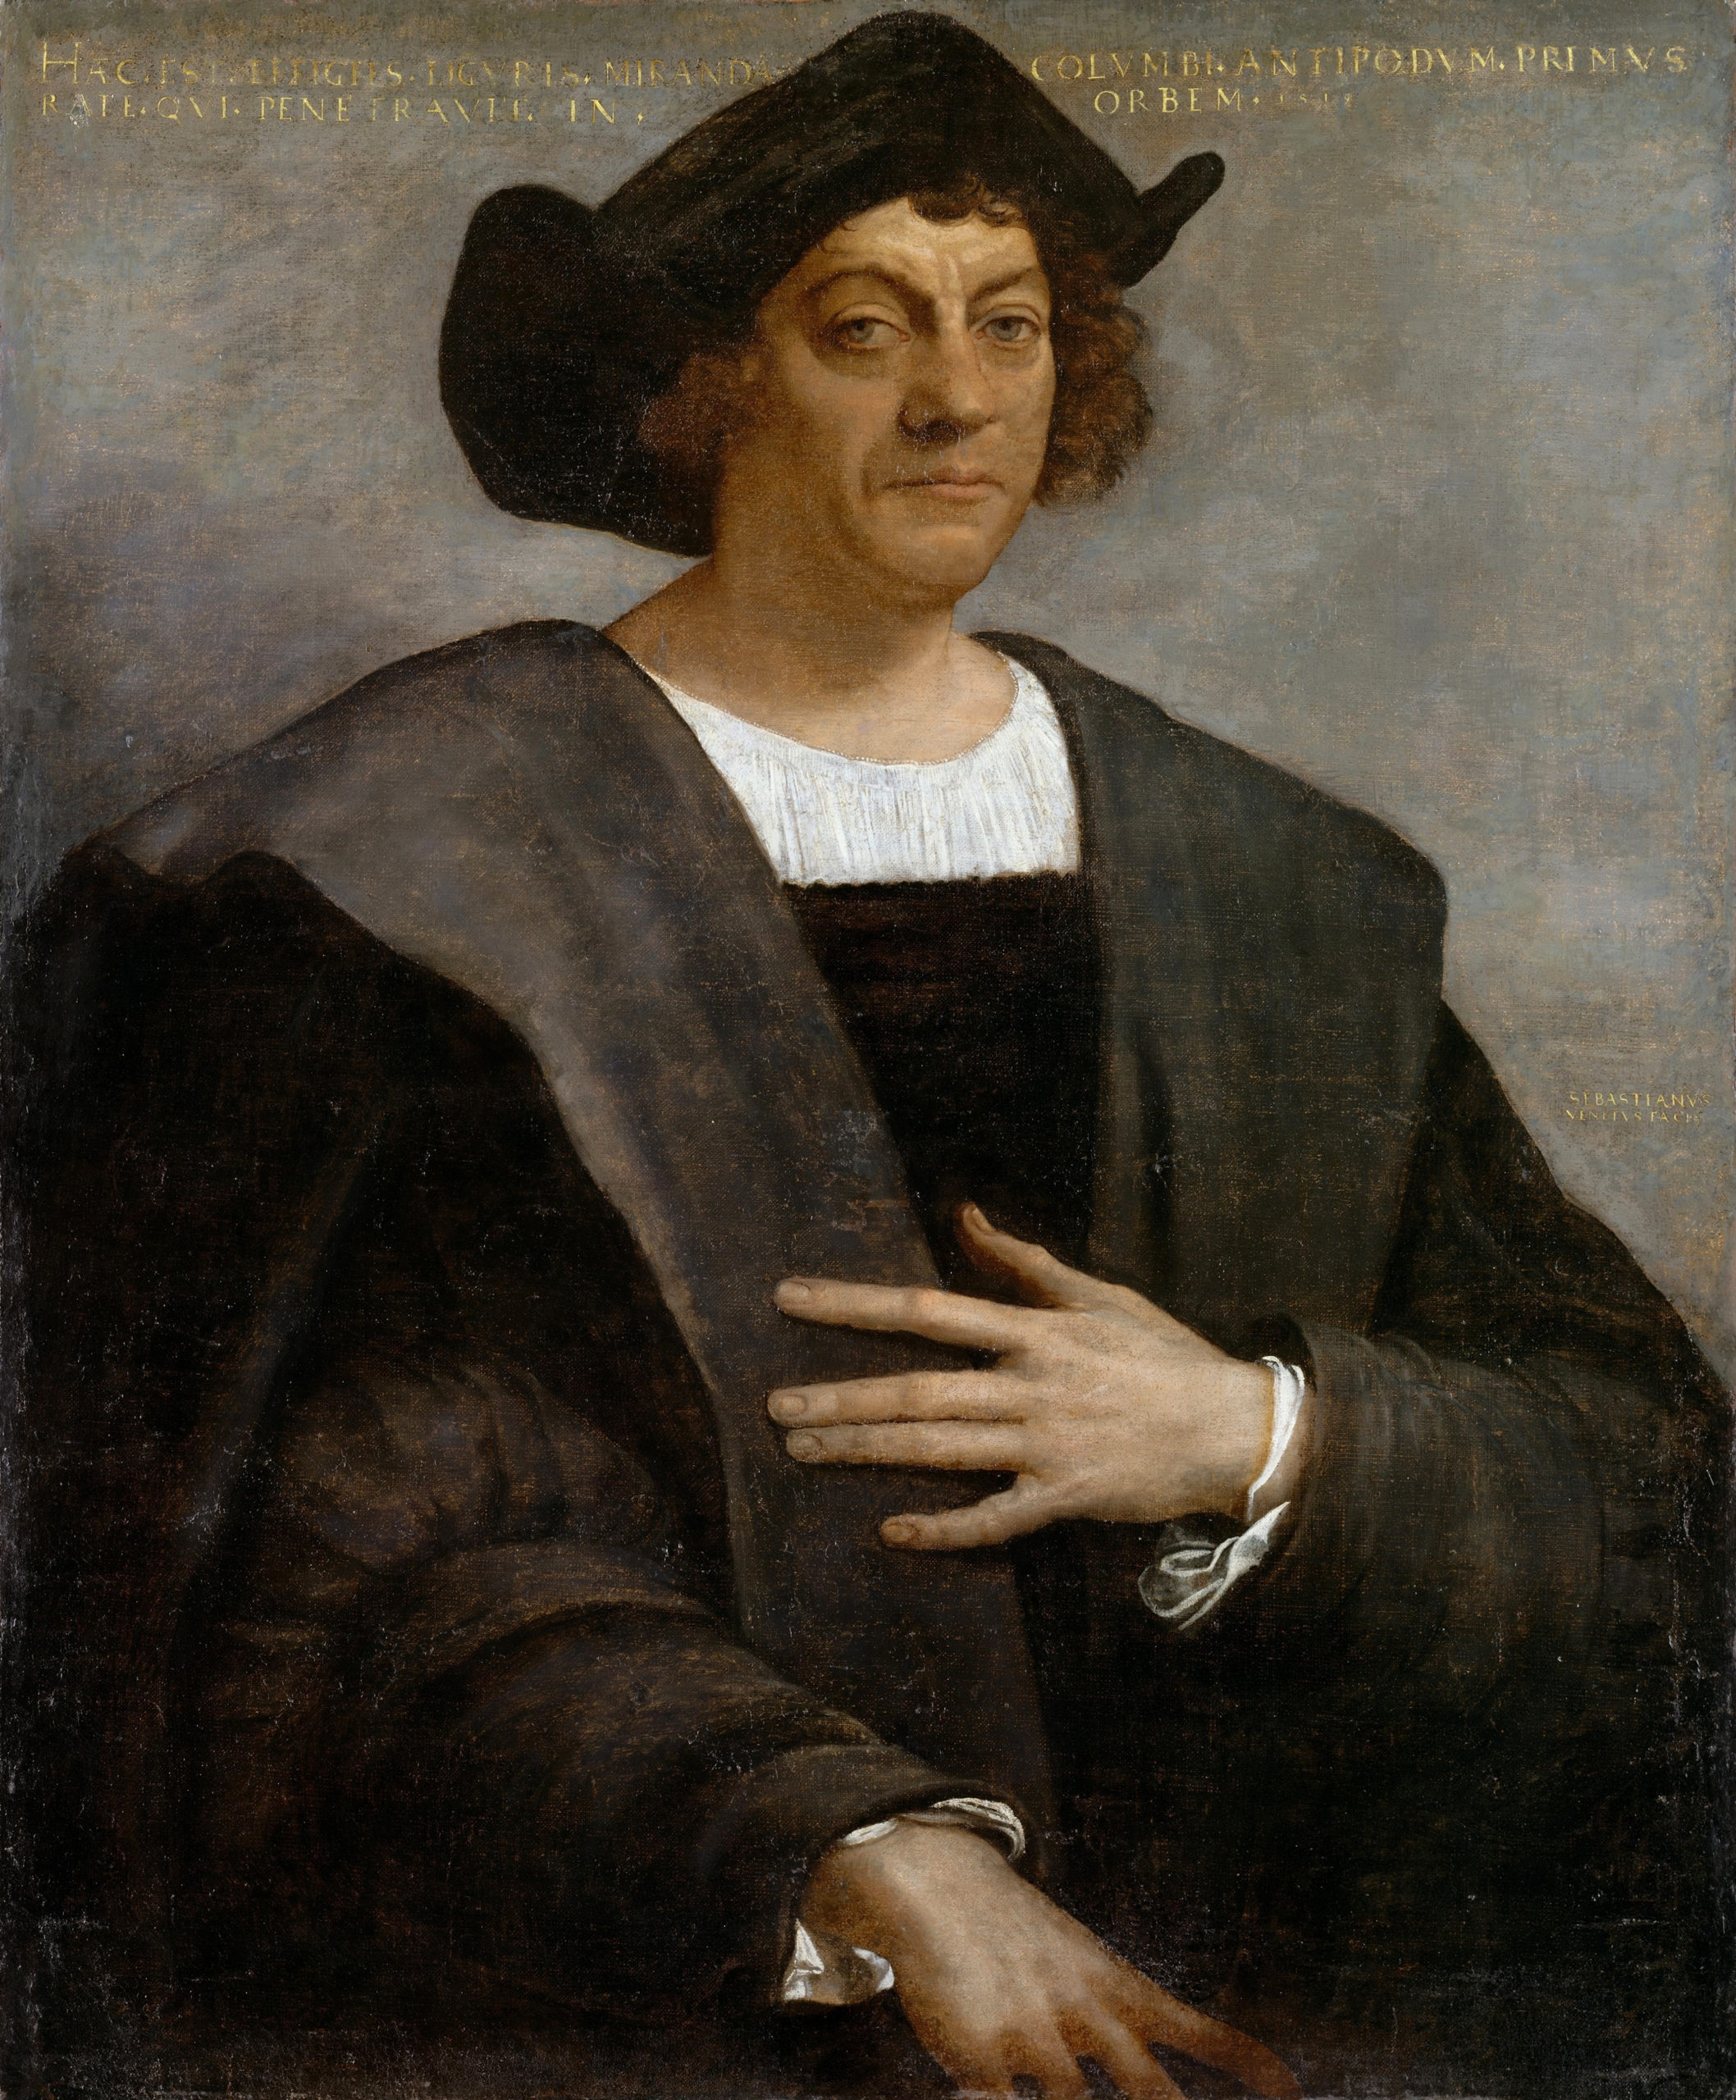 By Sebastiano del Piombo - This file was donated to Wikimedia Commons as part of a project by the Metropolitan Museum of Art. See the Image and Data Resources Open Access Policy, Public Domain, https://commons.wikimedia.org/w/index.php?curid=27554267